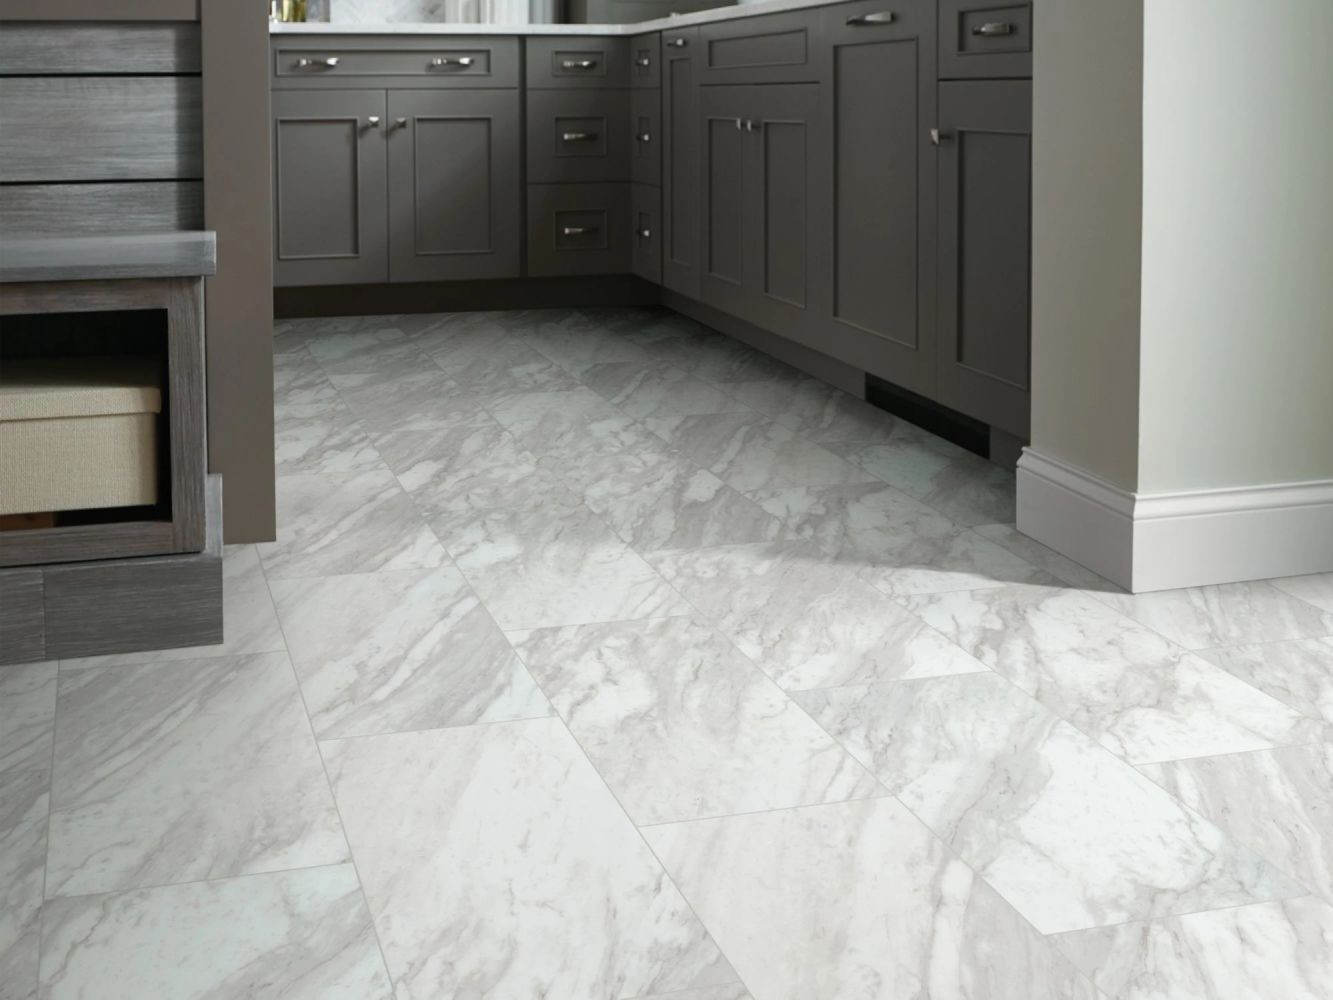 Shaw Floors Resilient Residential Paragon Tile Plus Oyster 01010_1022V